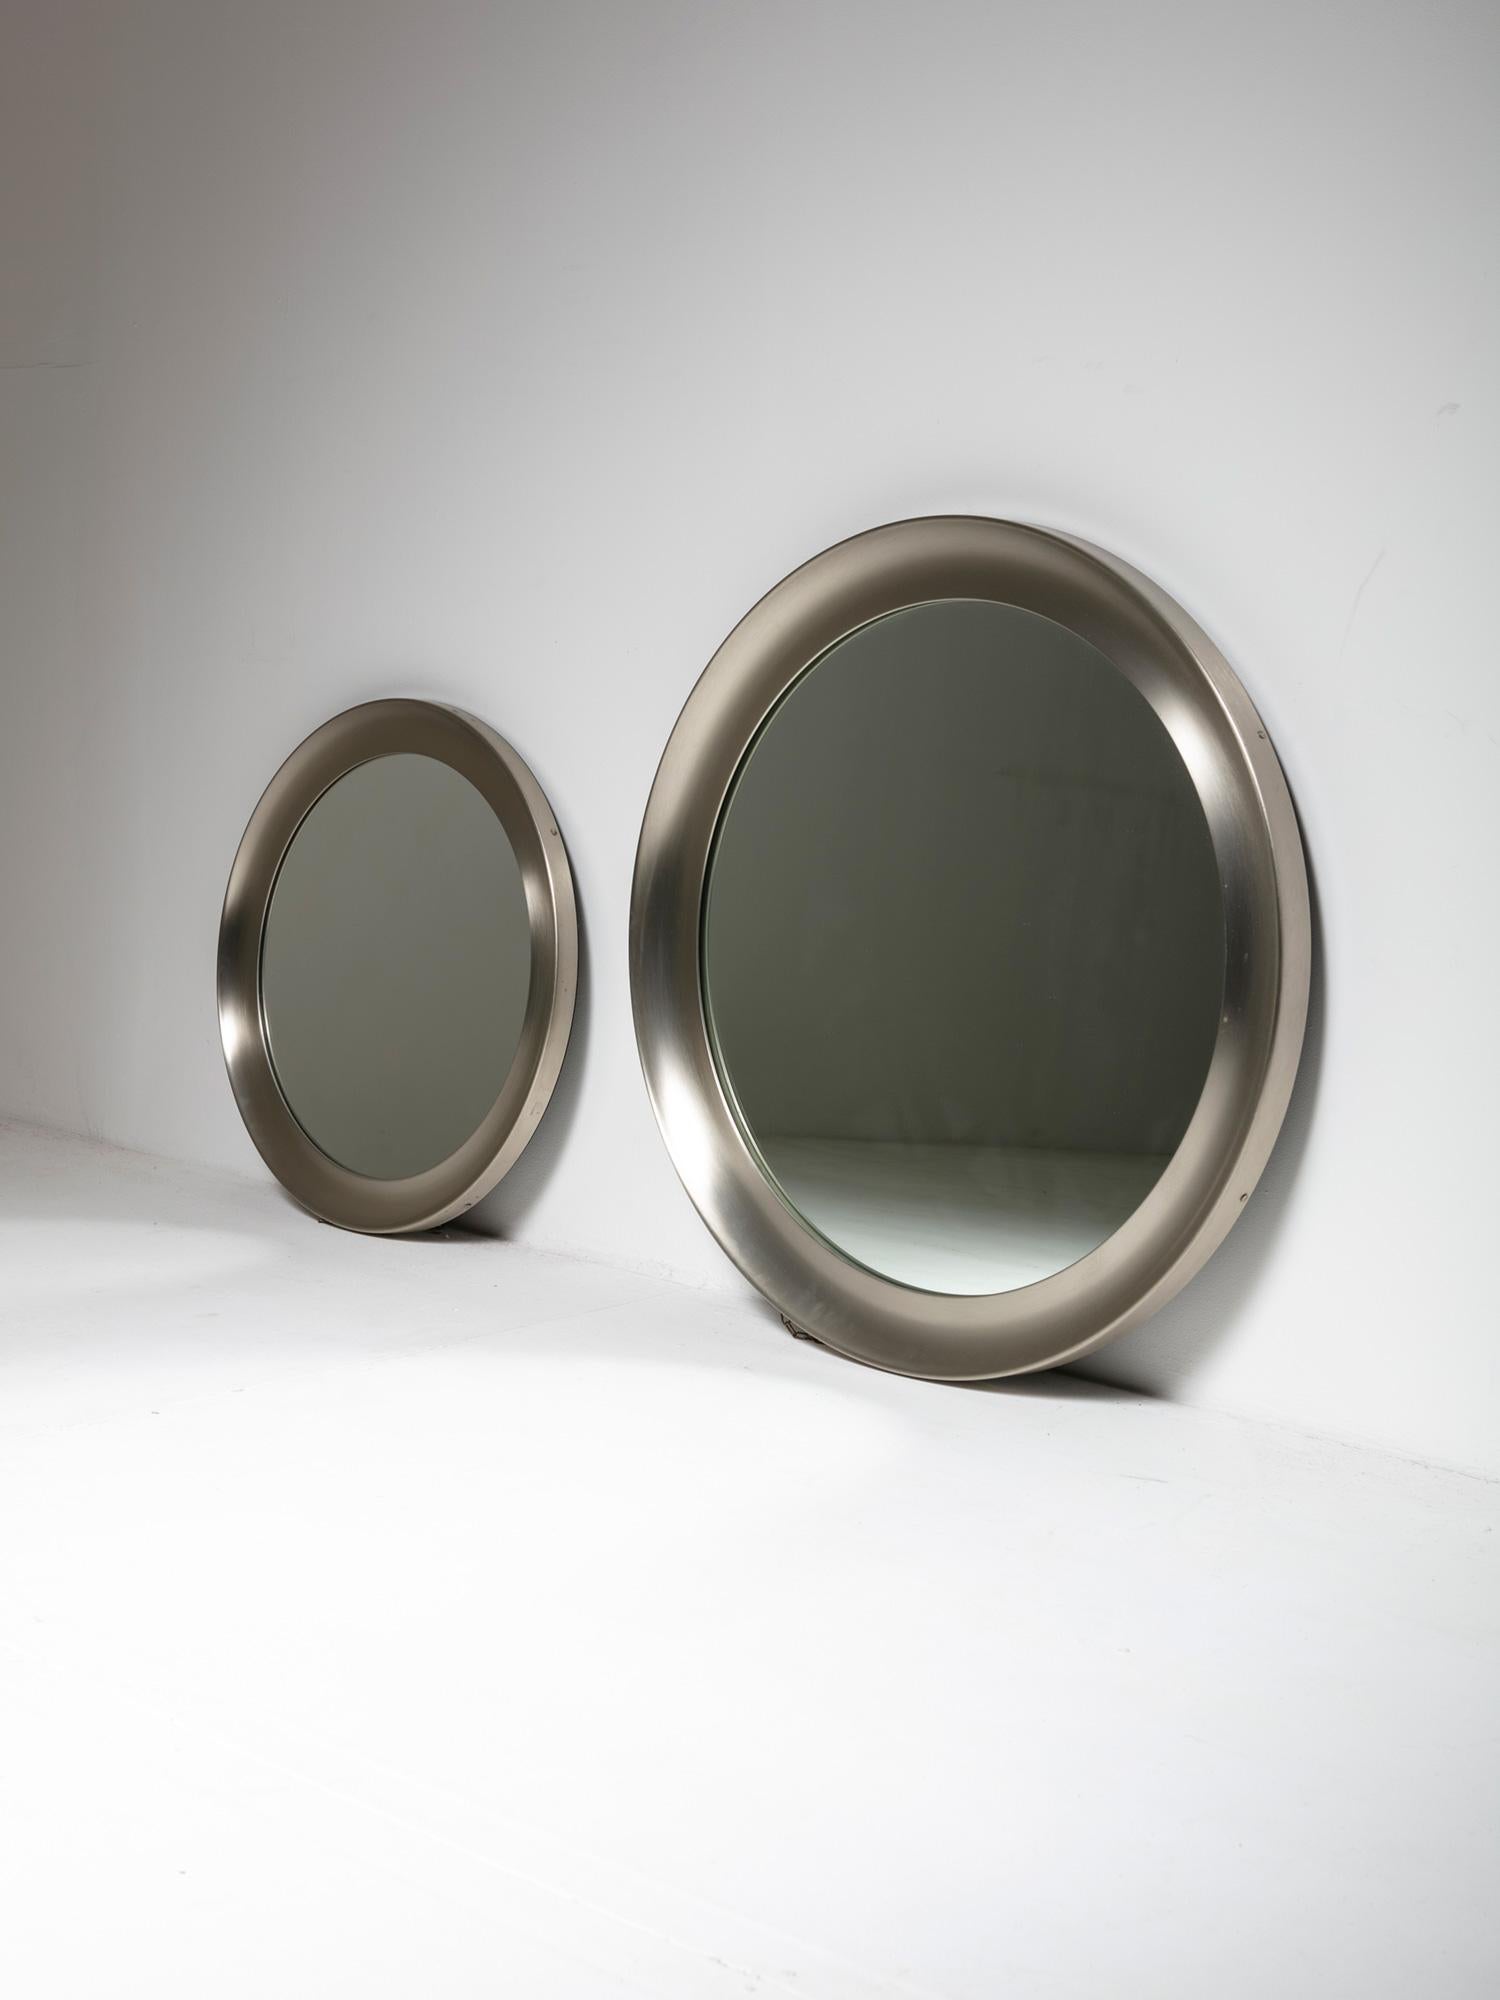 Two Narcisso mirrors by Sergio Mazza for Artemide.
Nickeled opaque brass frames - diameters cms 62 and 83.
     